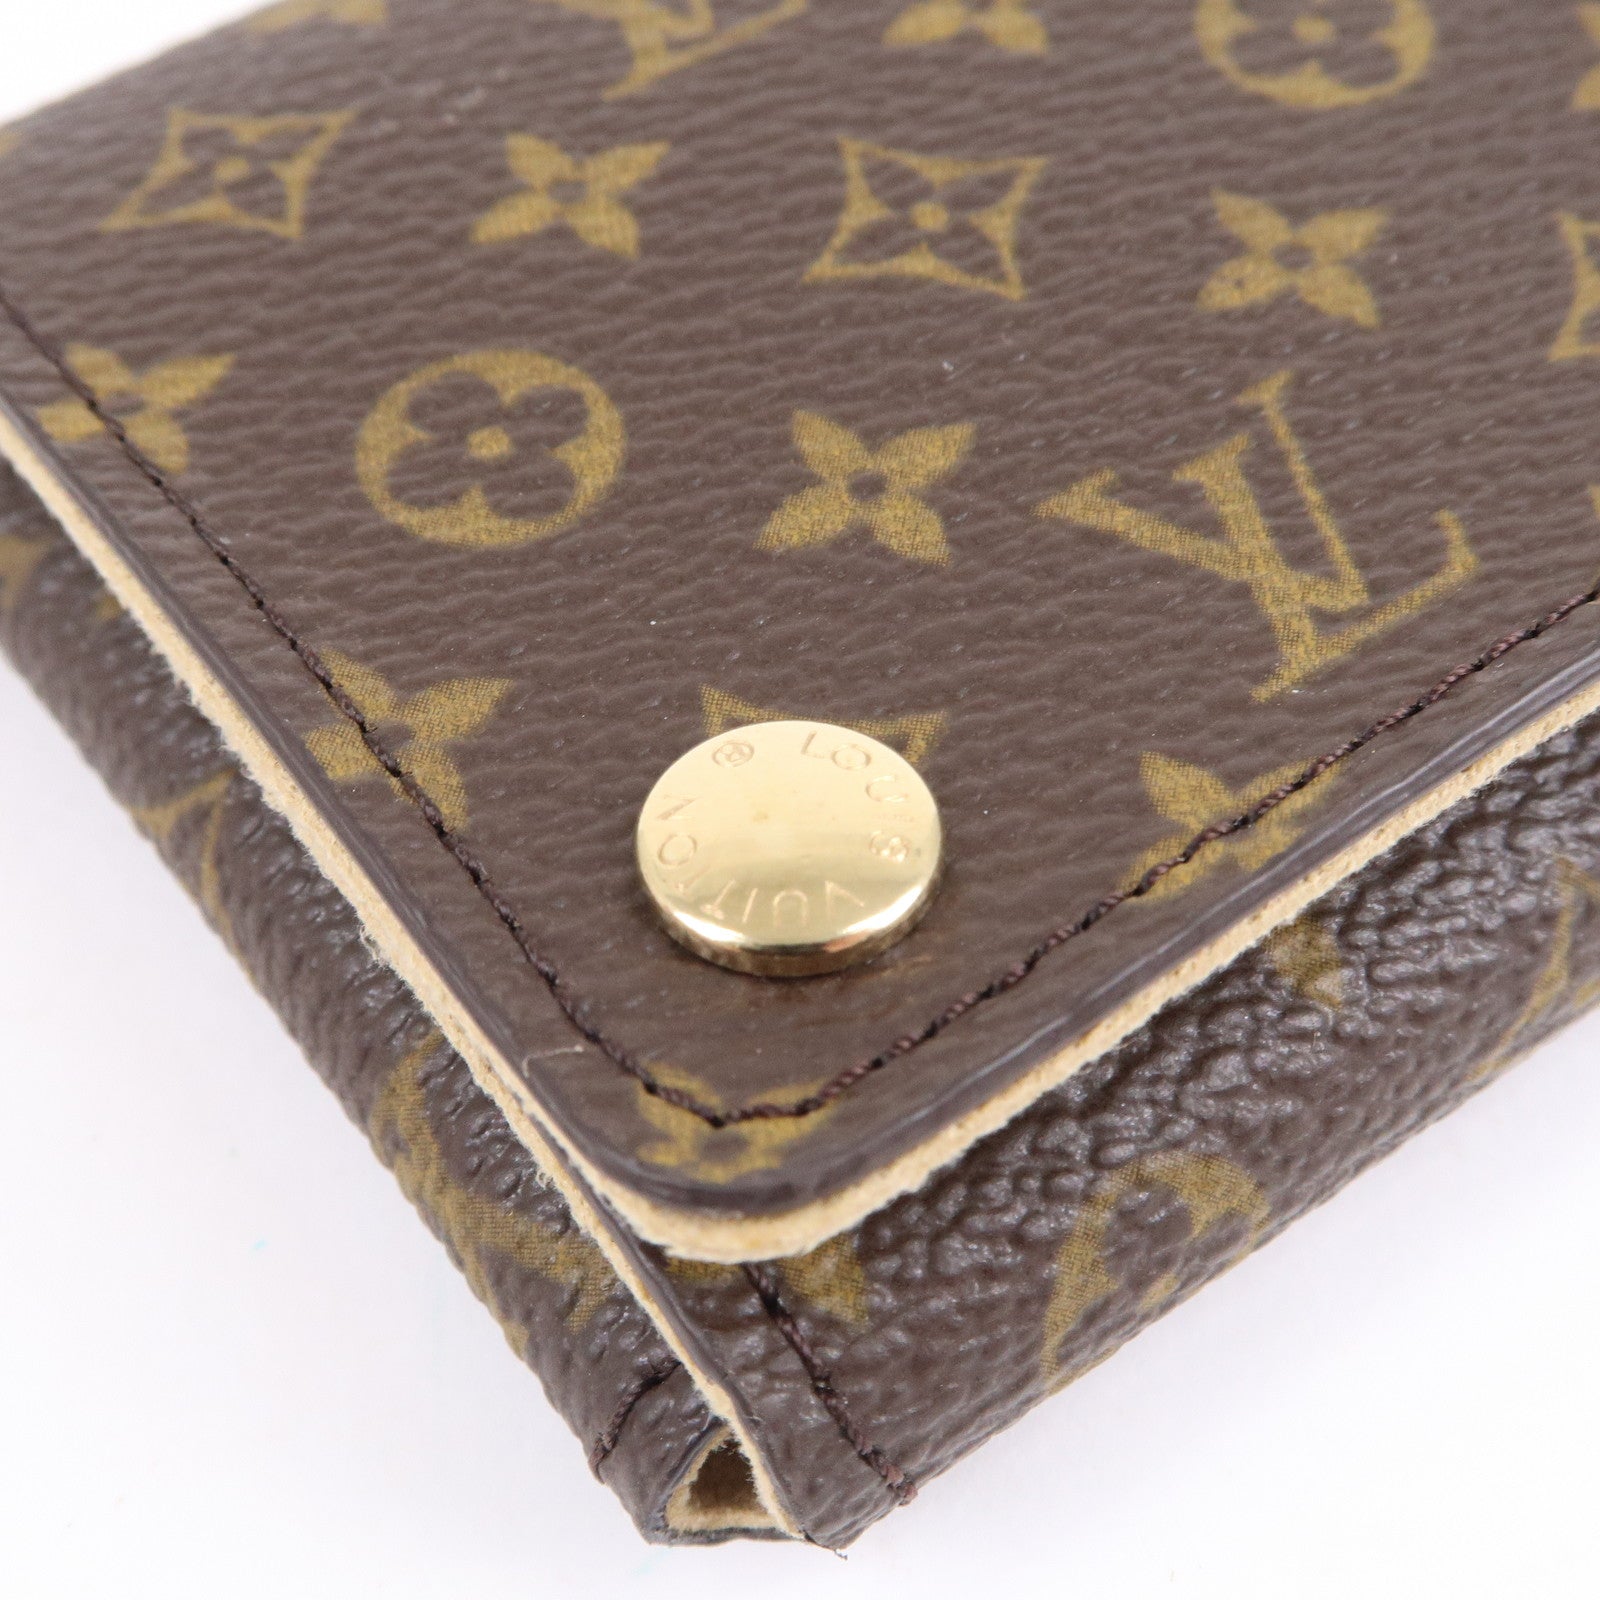 Louis-Vuitton-Monogram-Jewelry-Case-For-Ring-Brown – dct